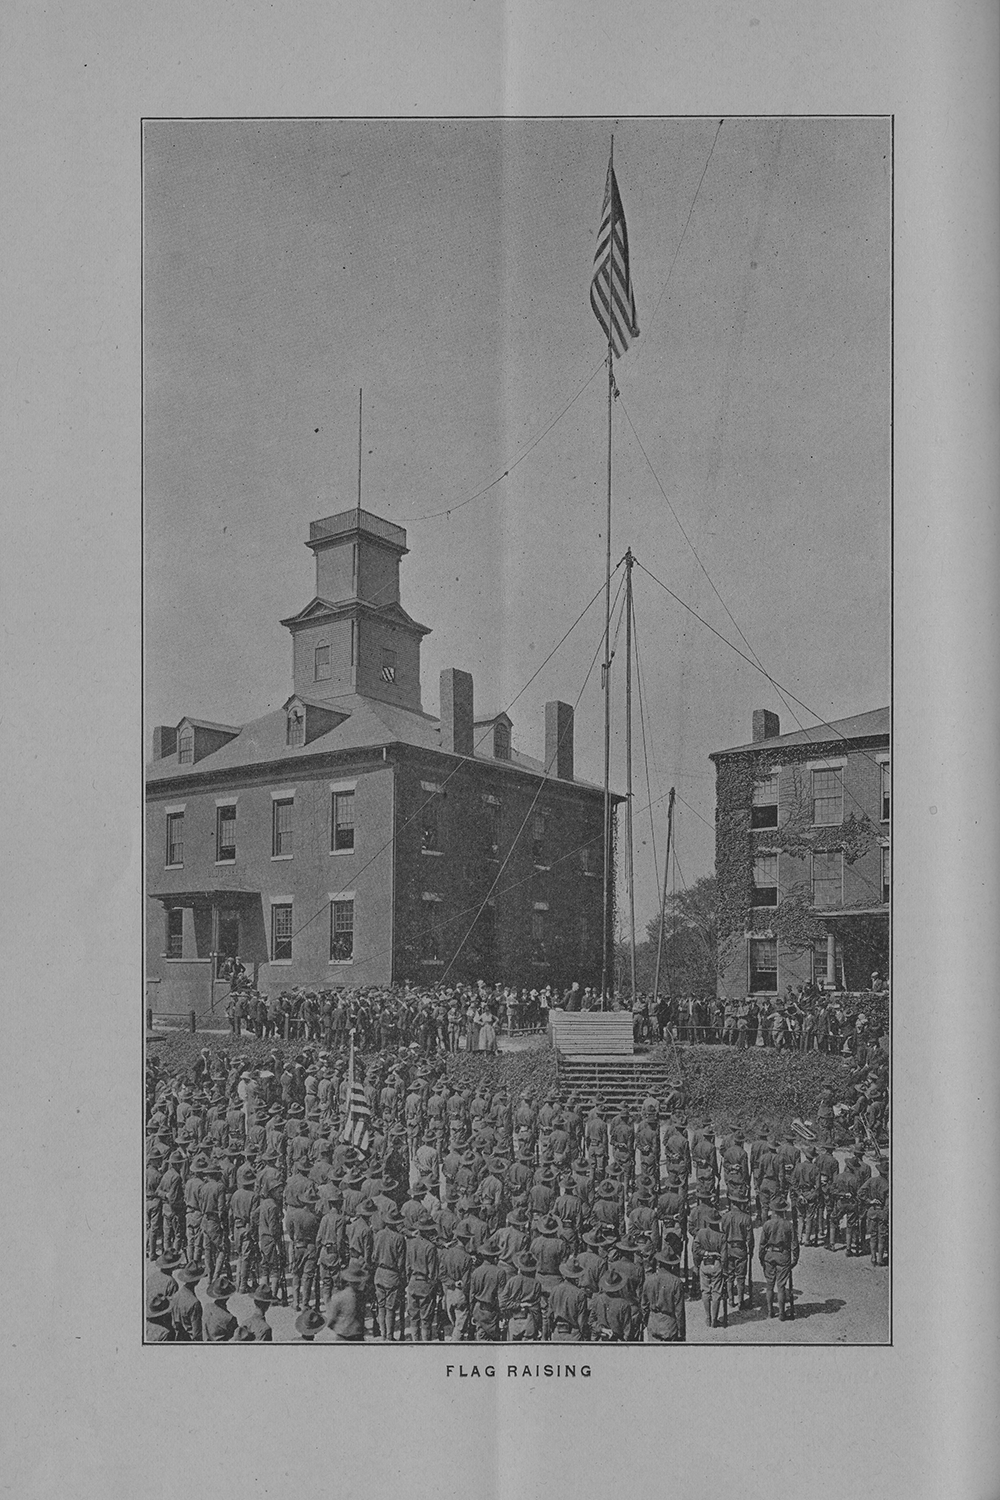 Officers in training stand at attention during the raising of the flag in 1918.